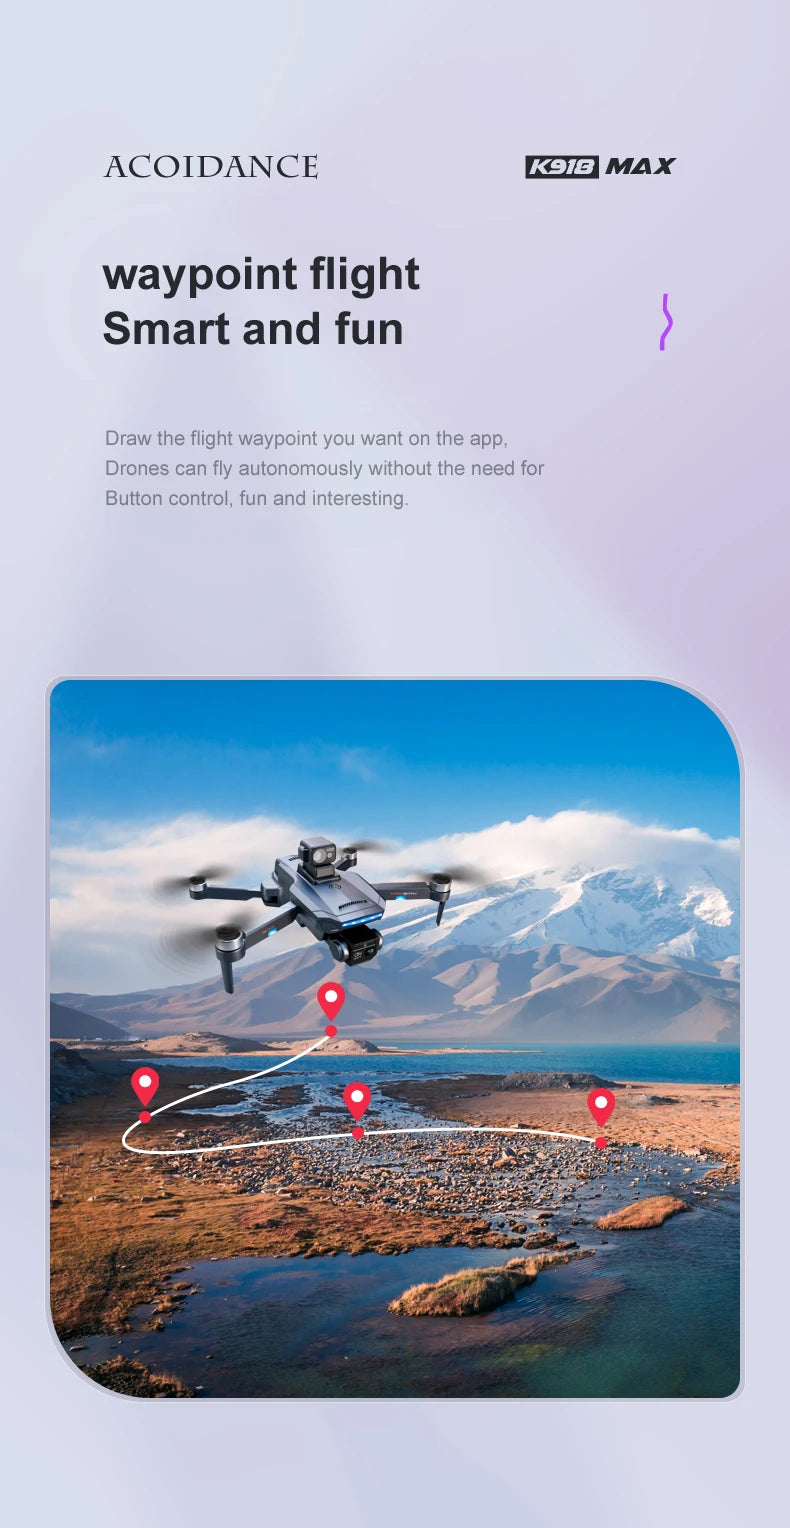 XYRC K918 MAX GPS Drone, Drones can fly autonomously without the need for button control, fun and interesting .